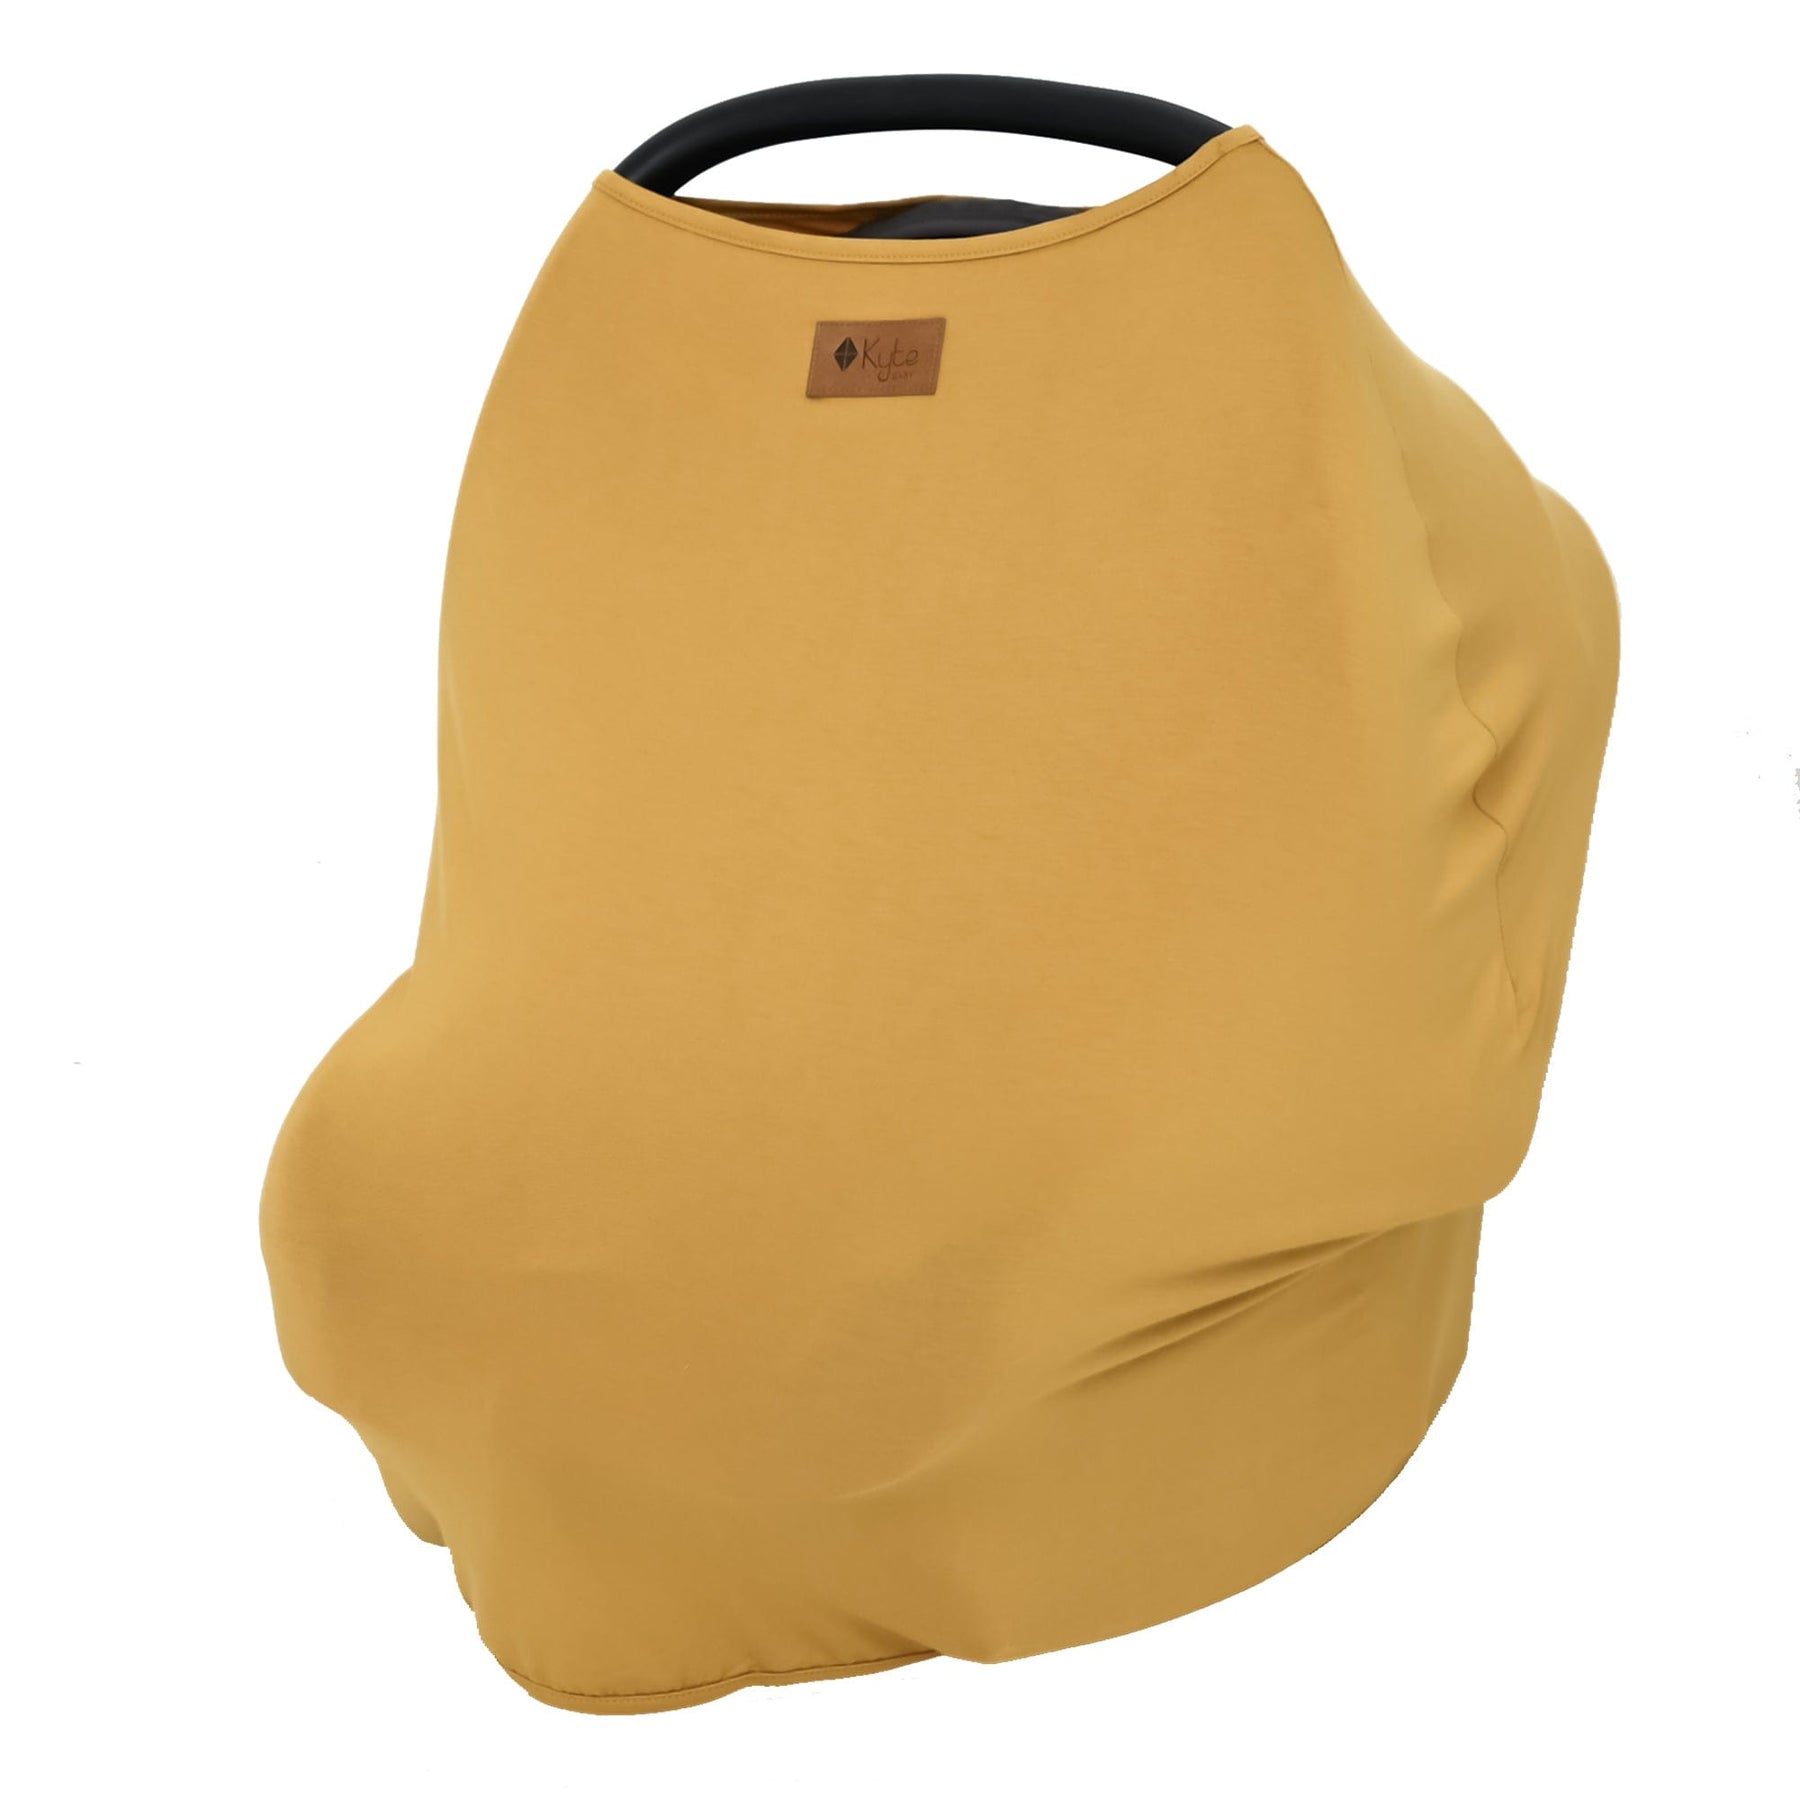 Kyte BABY Car Seat Cover in Marigold